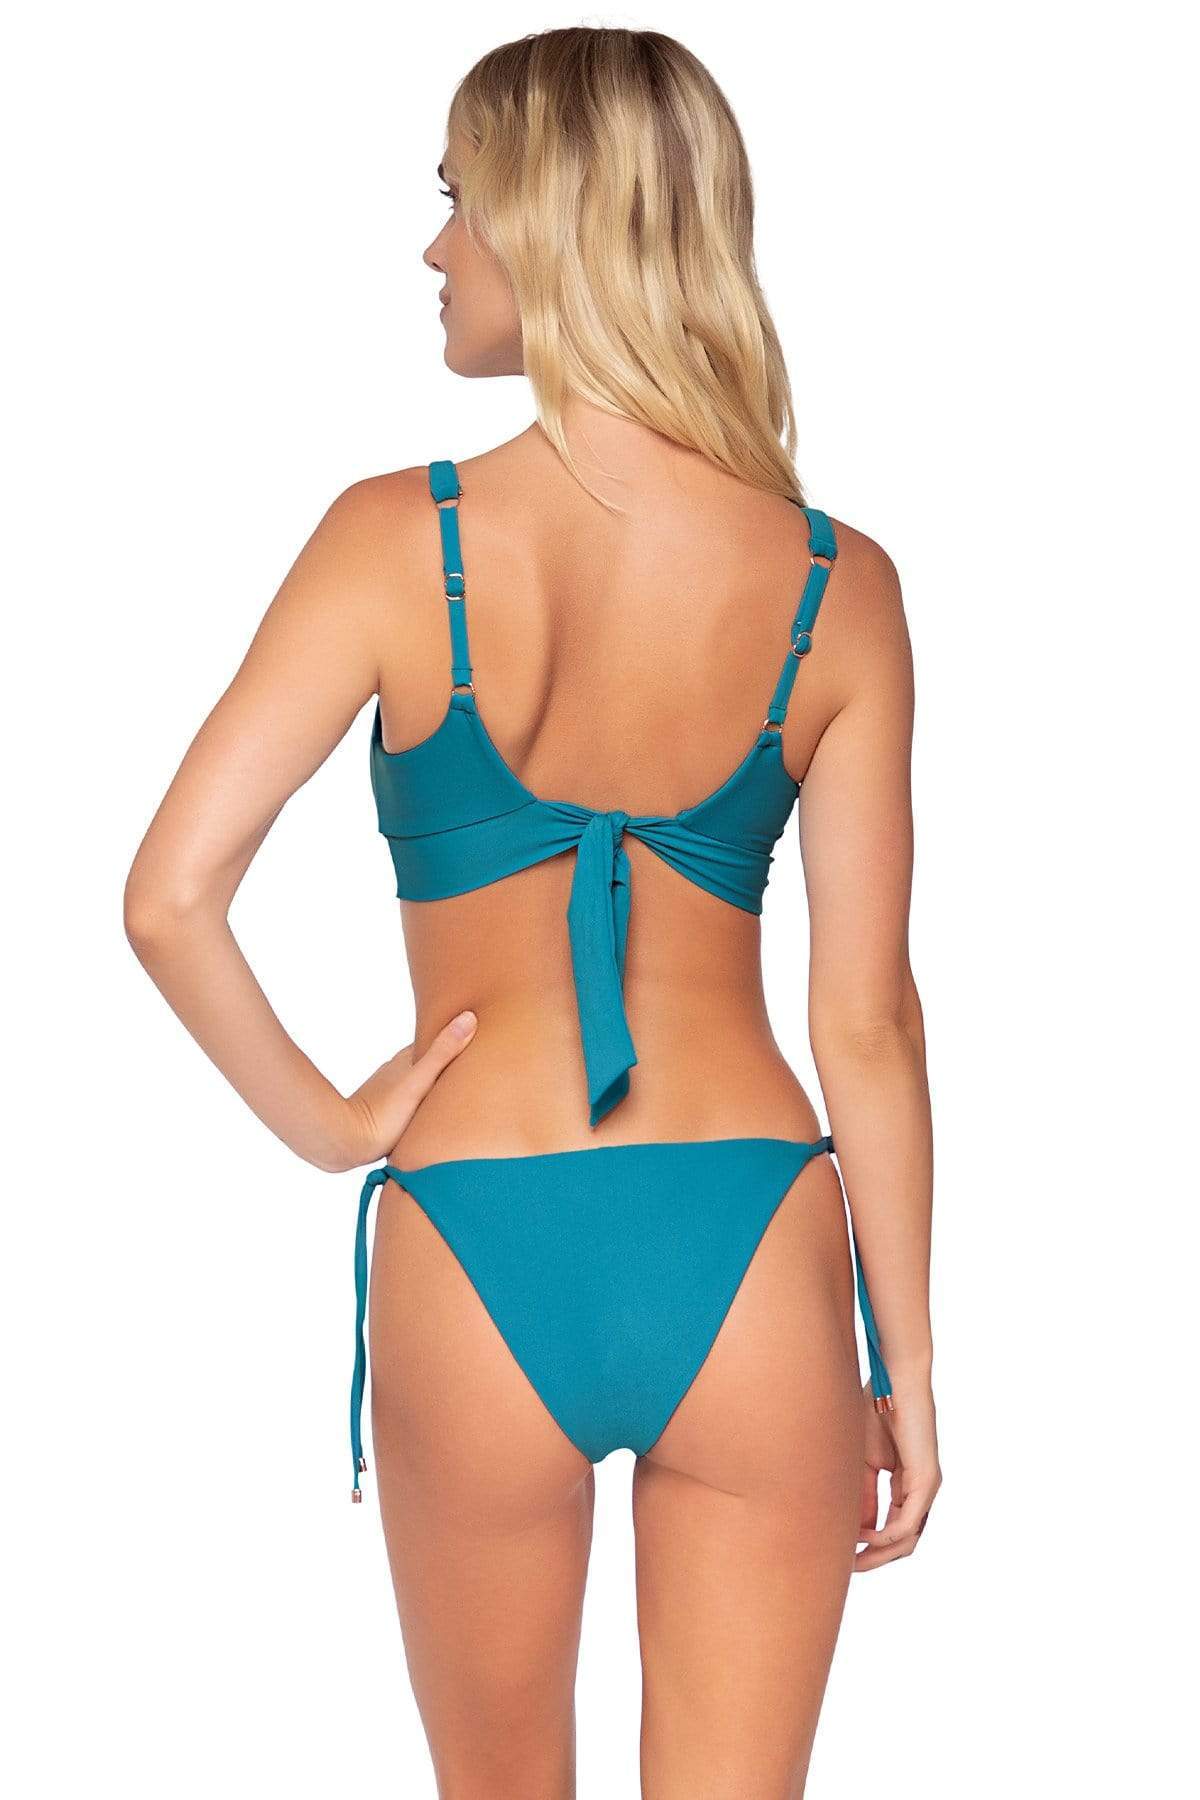 Bestswimwear -  Swim Systems Pacific Blue Holly Tie Side